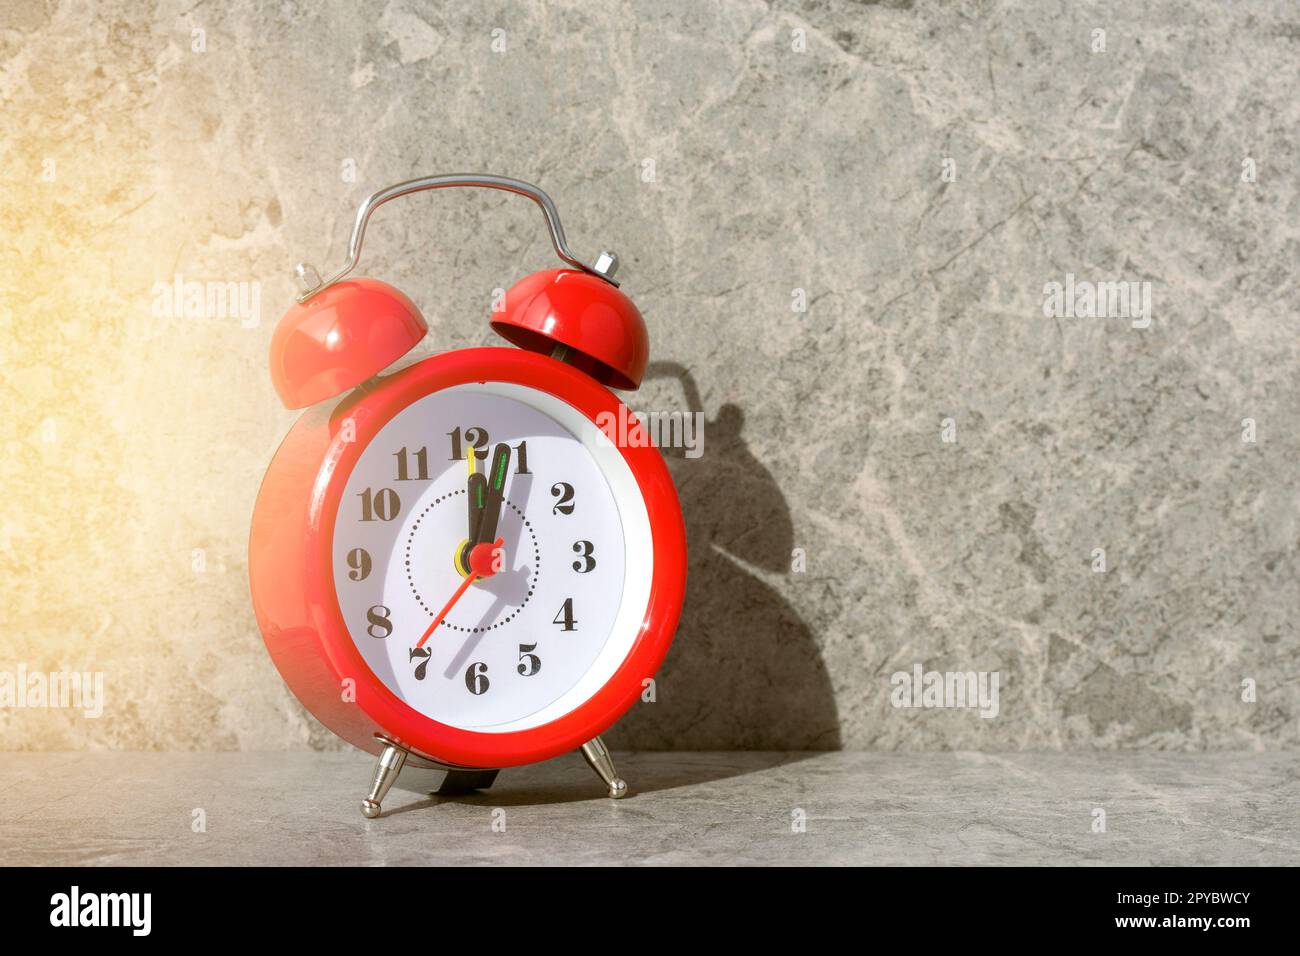 Red alarm clock with a sunlight and shadow on the grey stone background Stock Photo